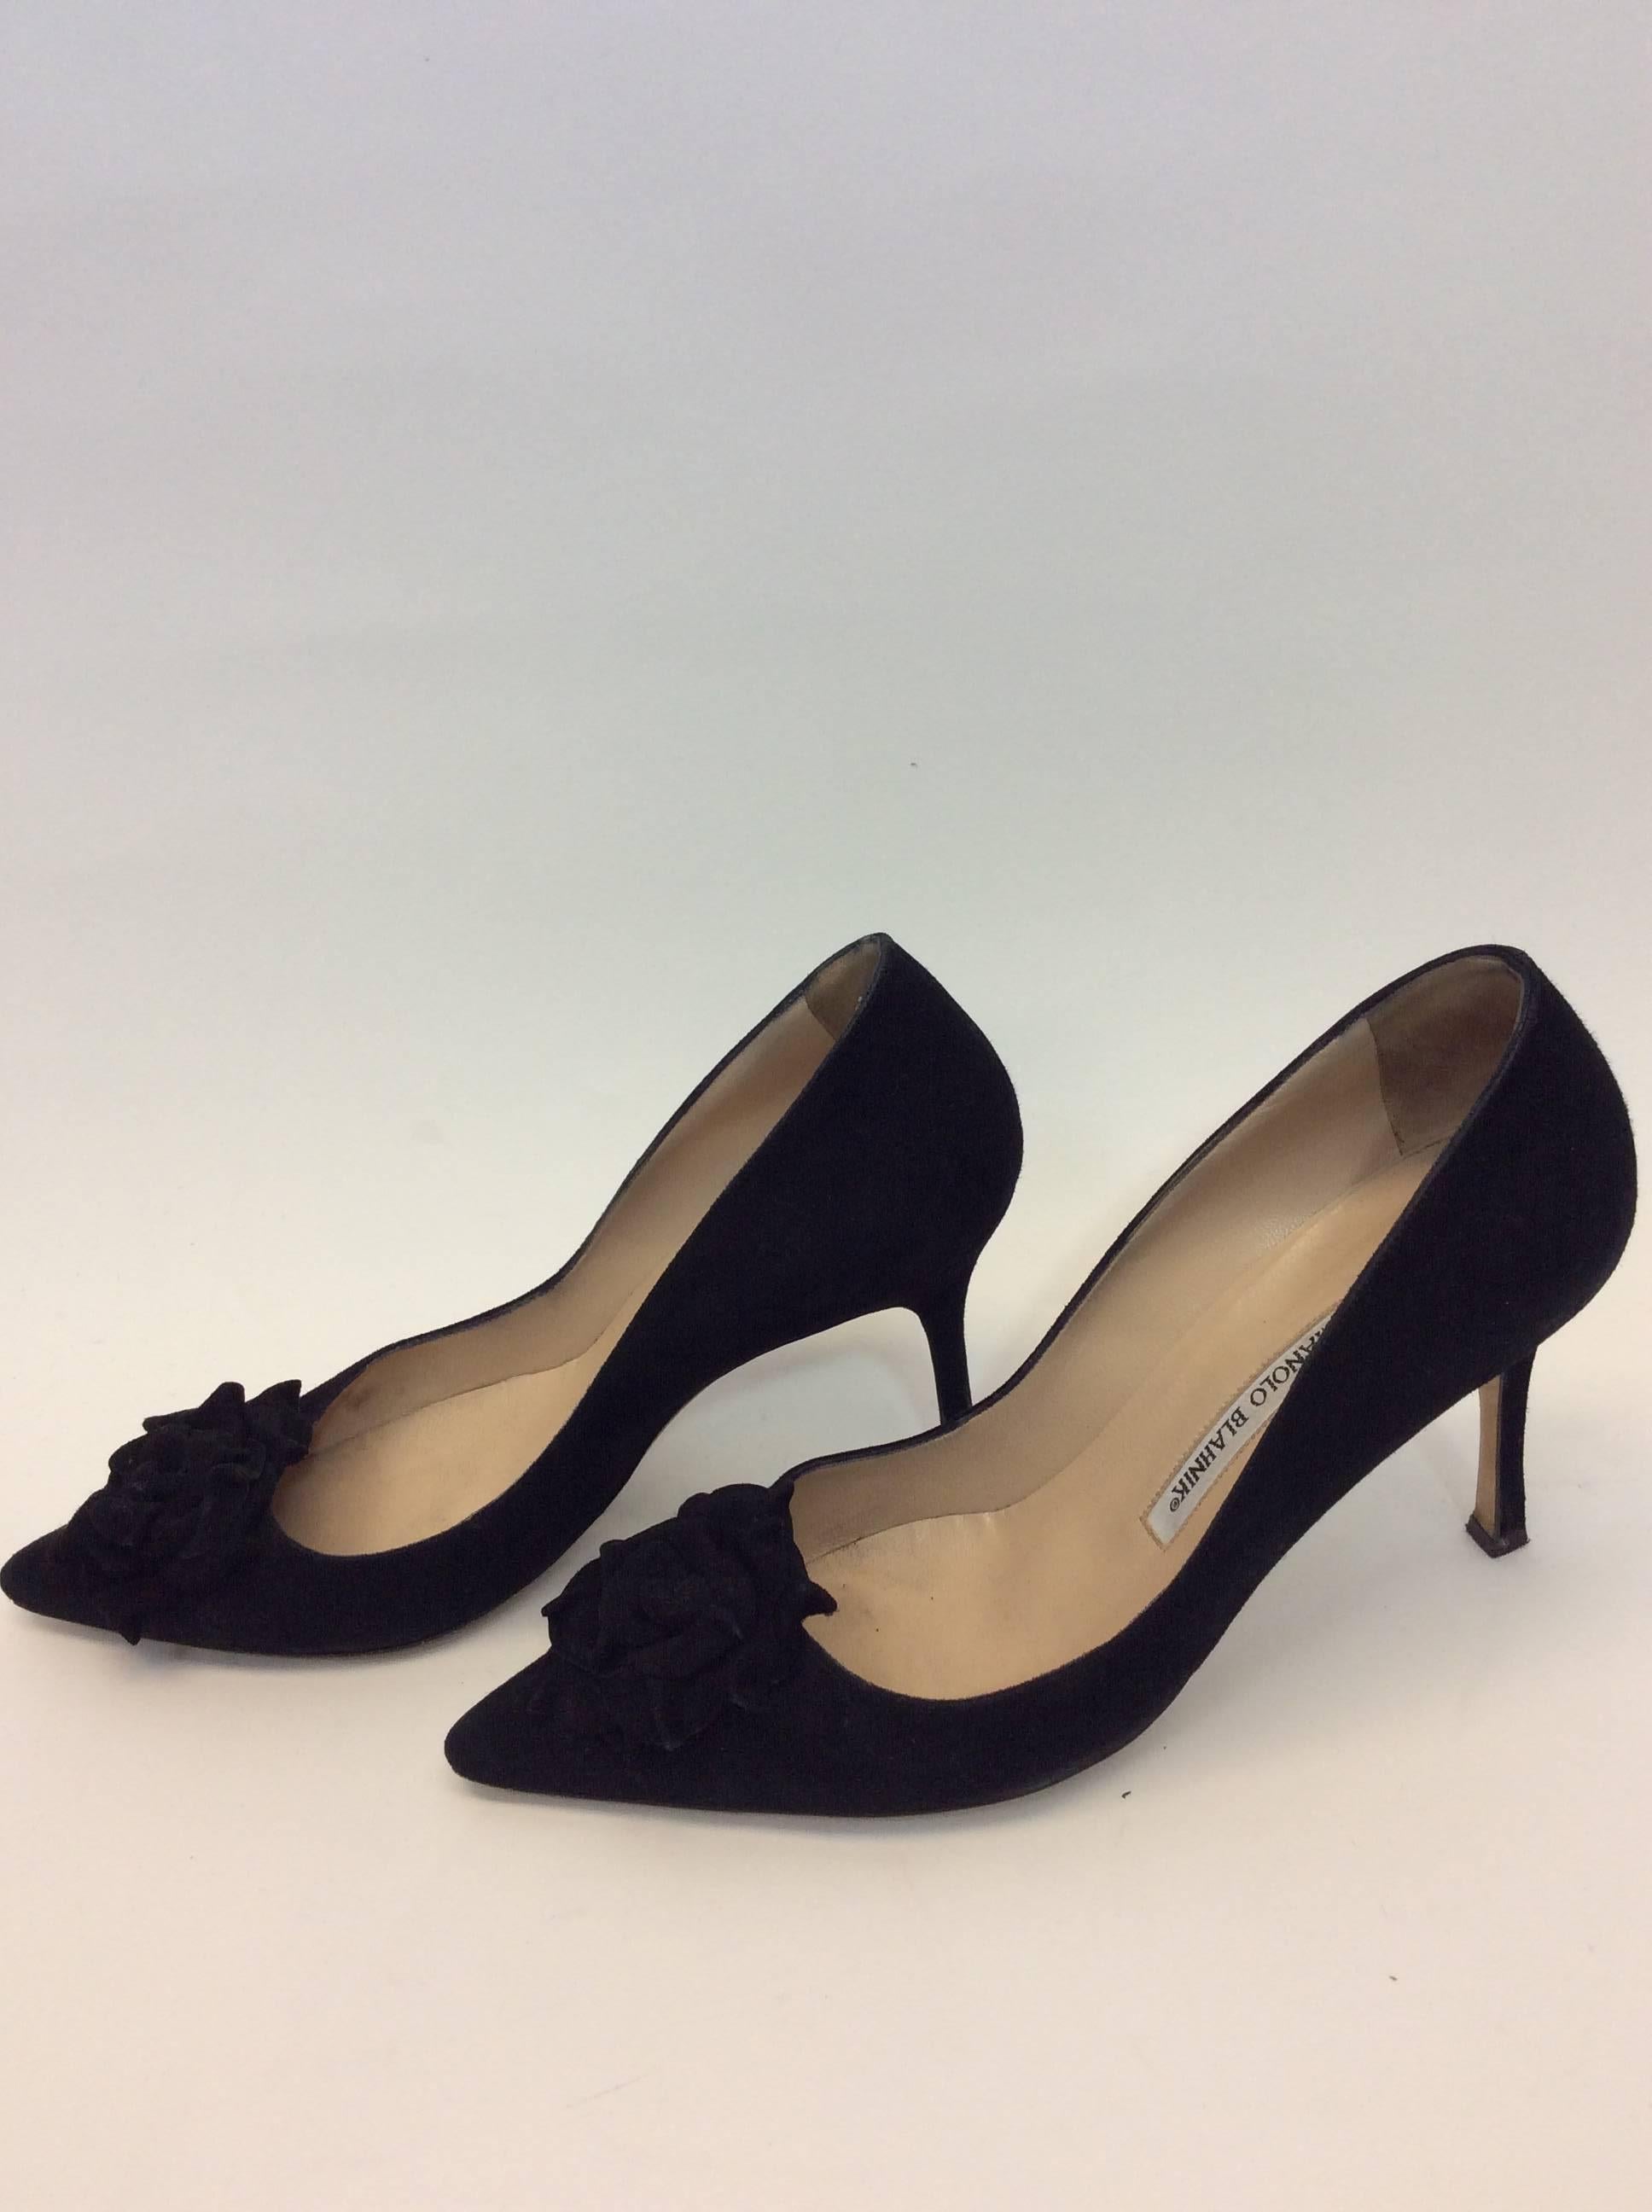 Manolo Blahnik Suede Rosette Detailed Pump In Excellent Condition For Sale In Narberth, PA